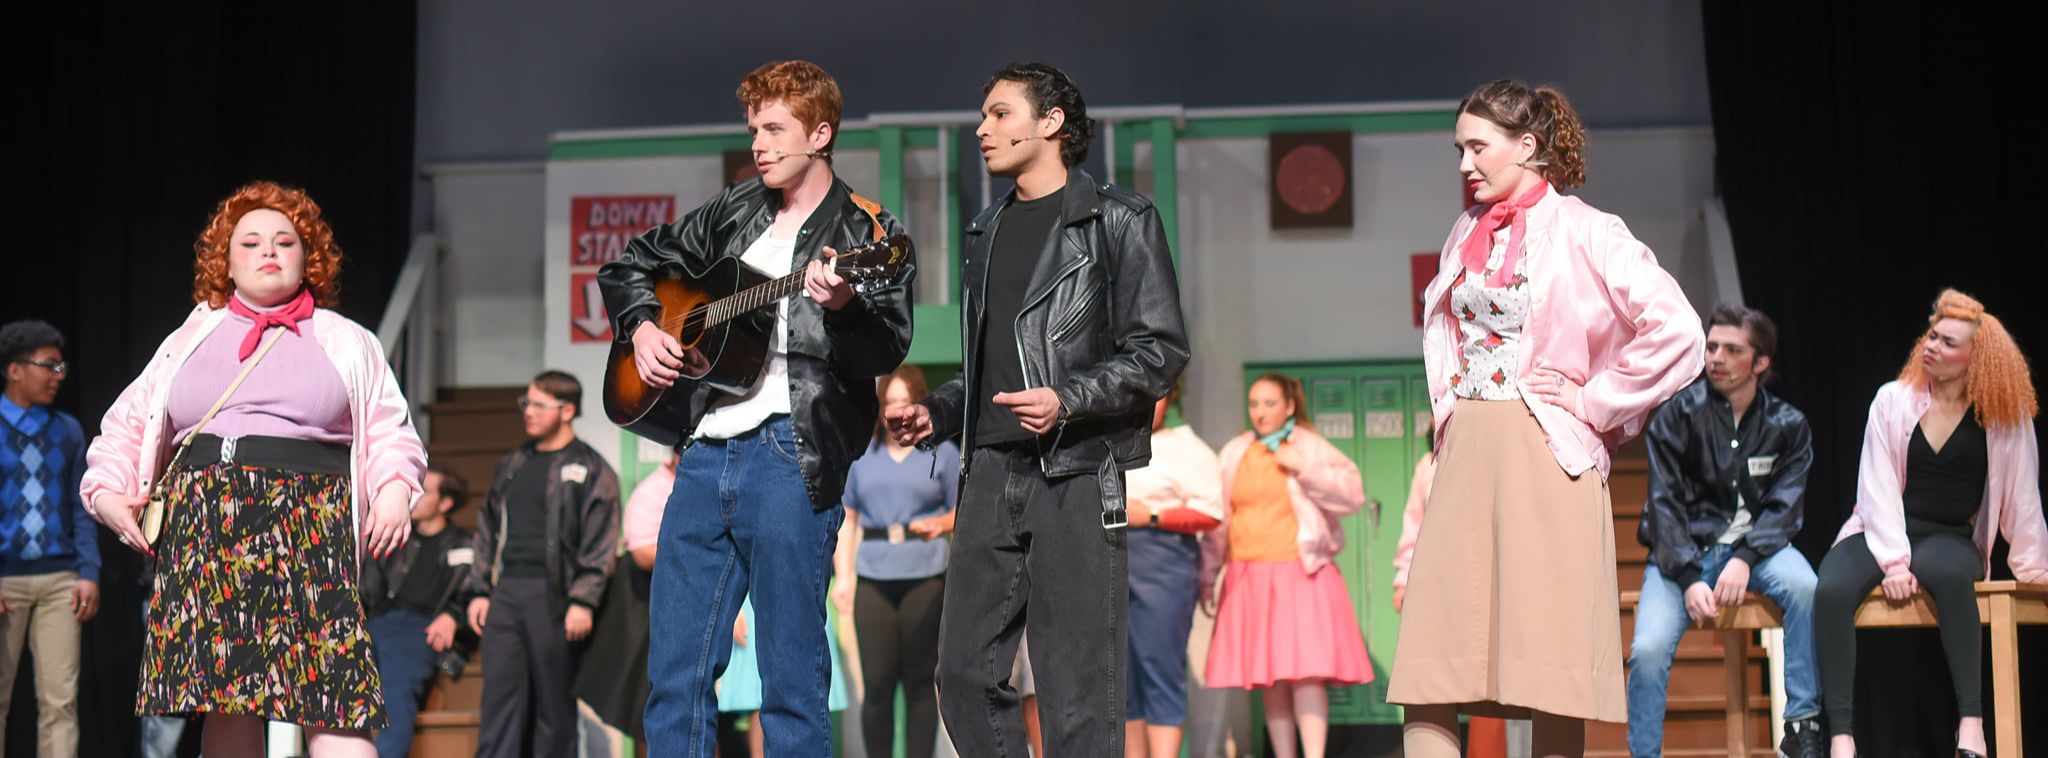 students on auditorium stage performing in the high school musical 